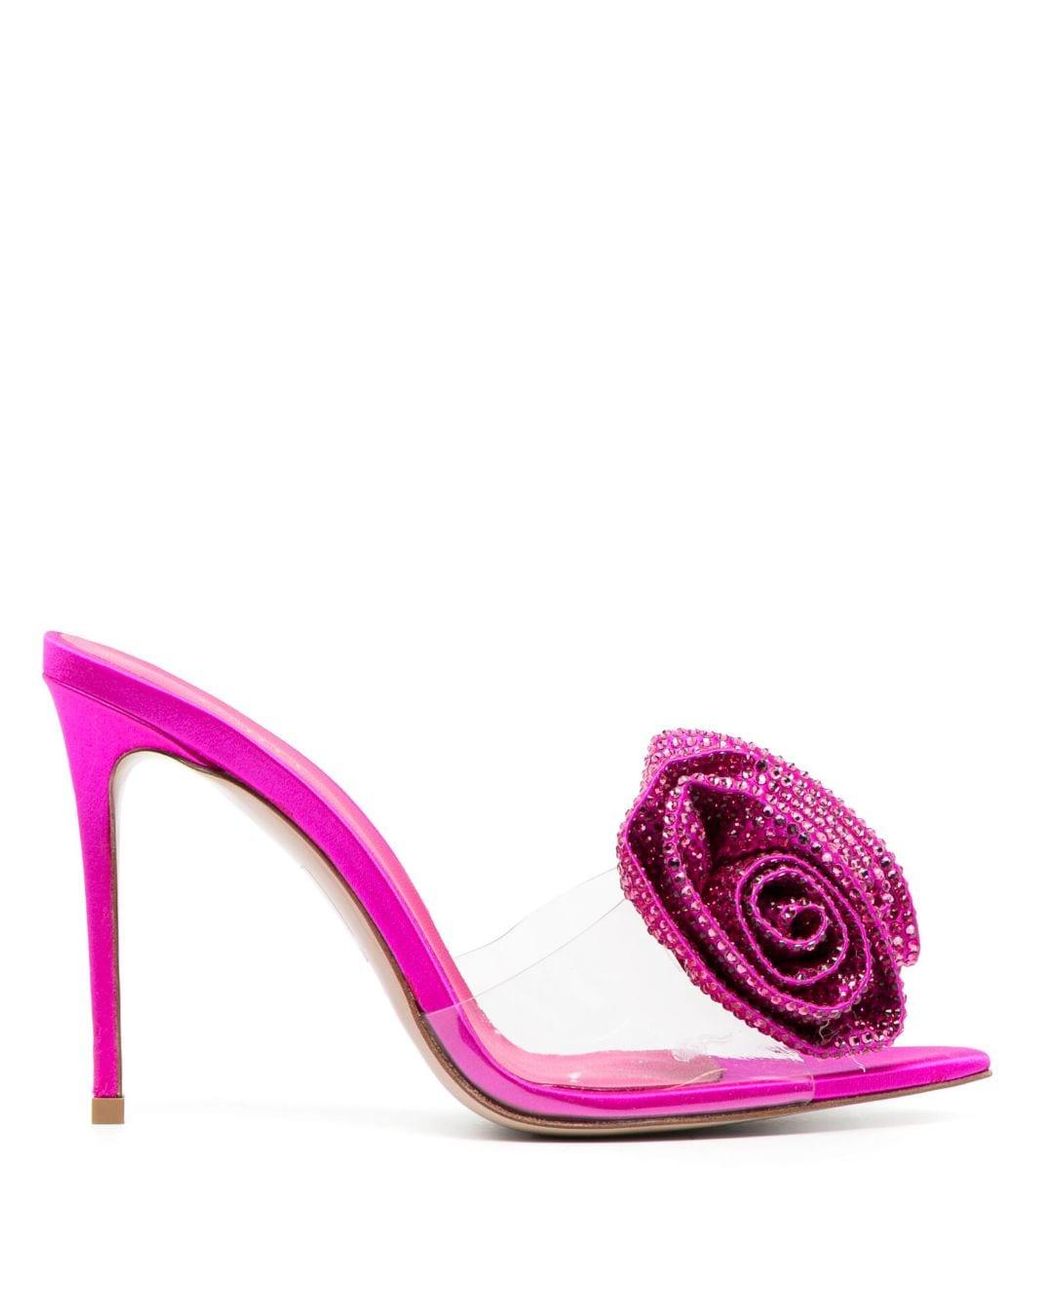 Le Silla Rose 100mm Crystal-embellished Mules in Pink | Lyst